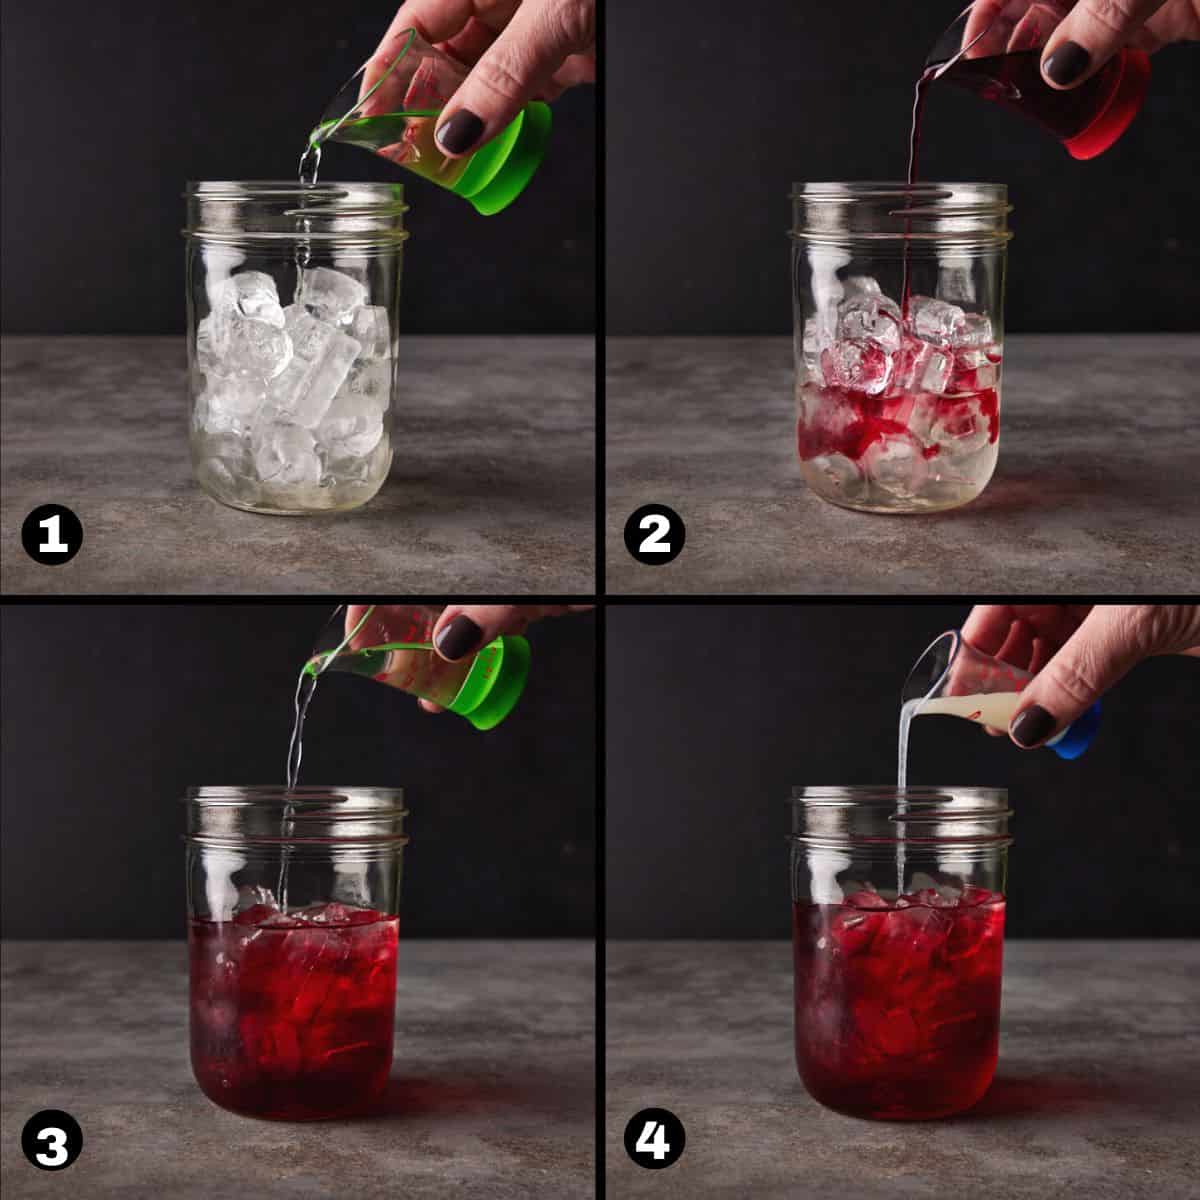 Steps 1-4 of making a cranberry margarita. Pouring liquors into shaker.